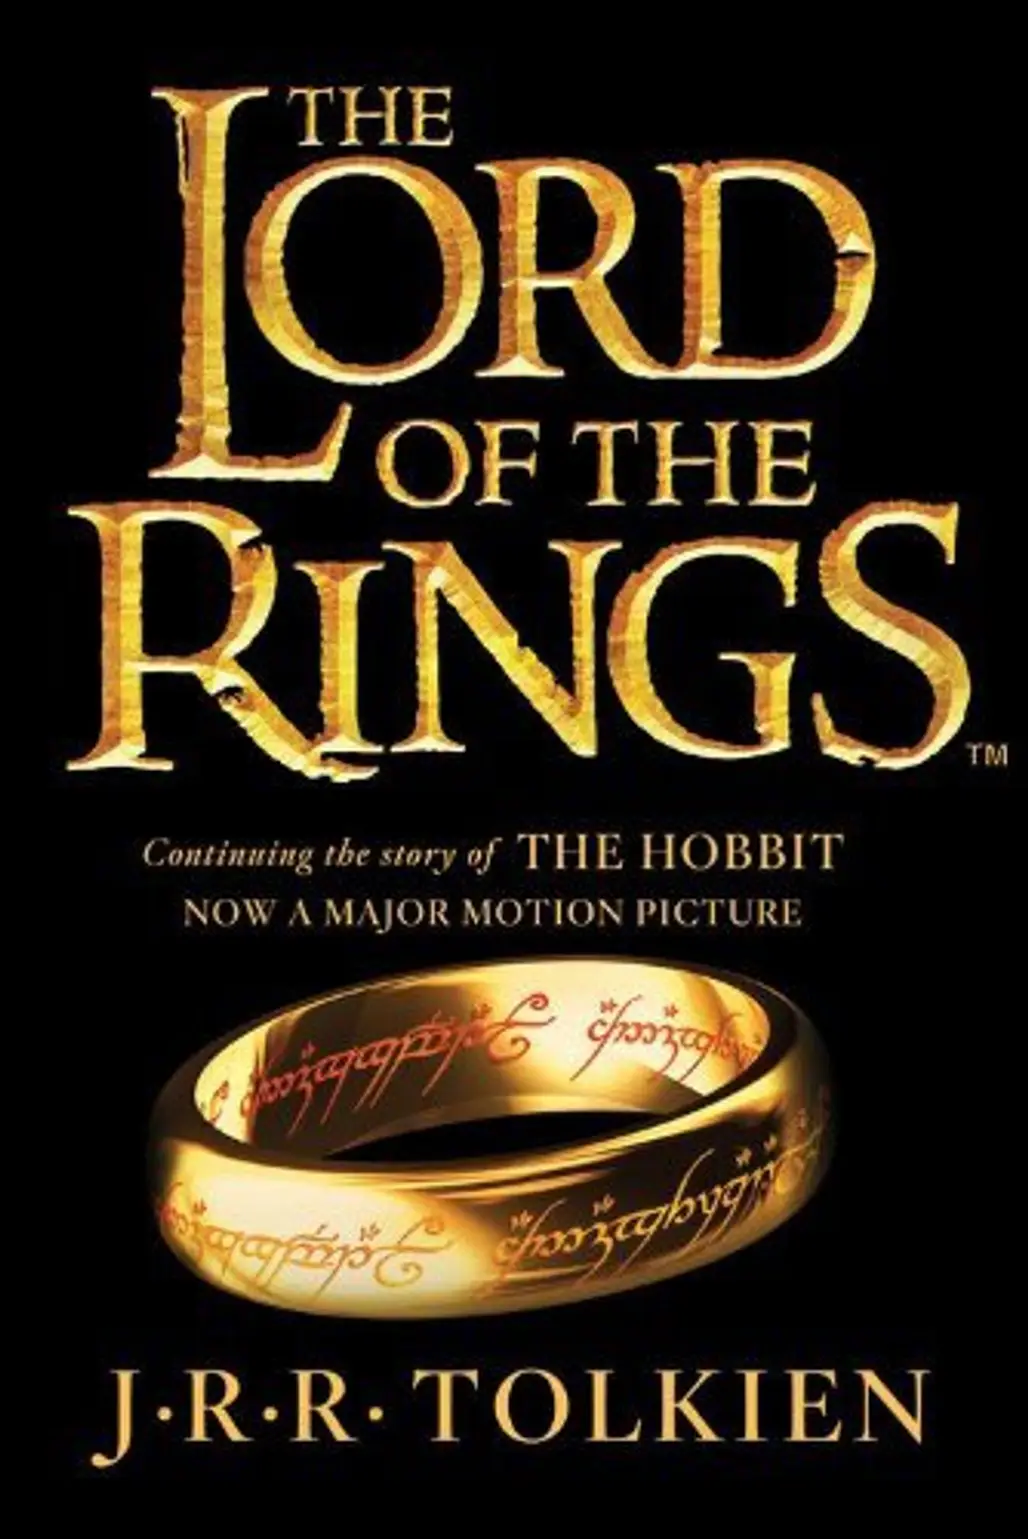 The Lord of the Rings Trilogy by J.R.R. Tolkien